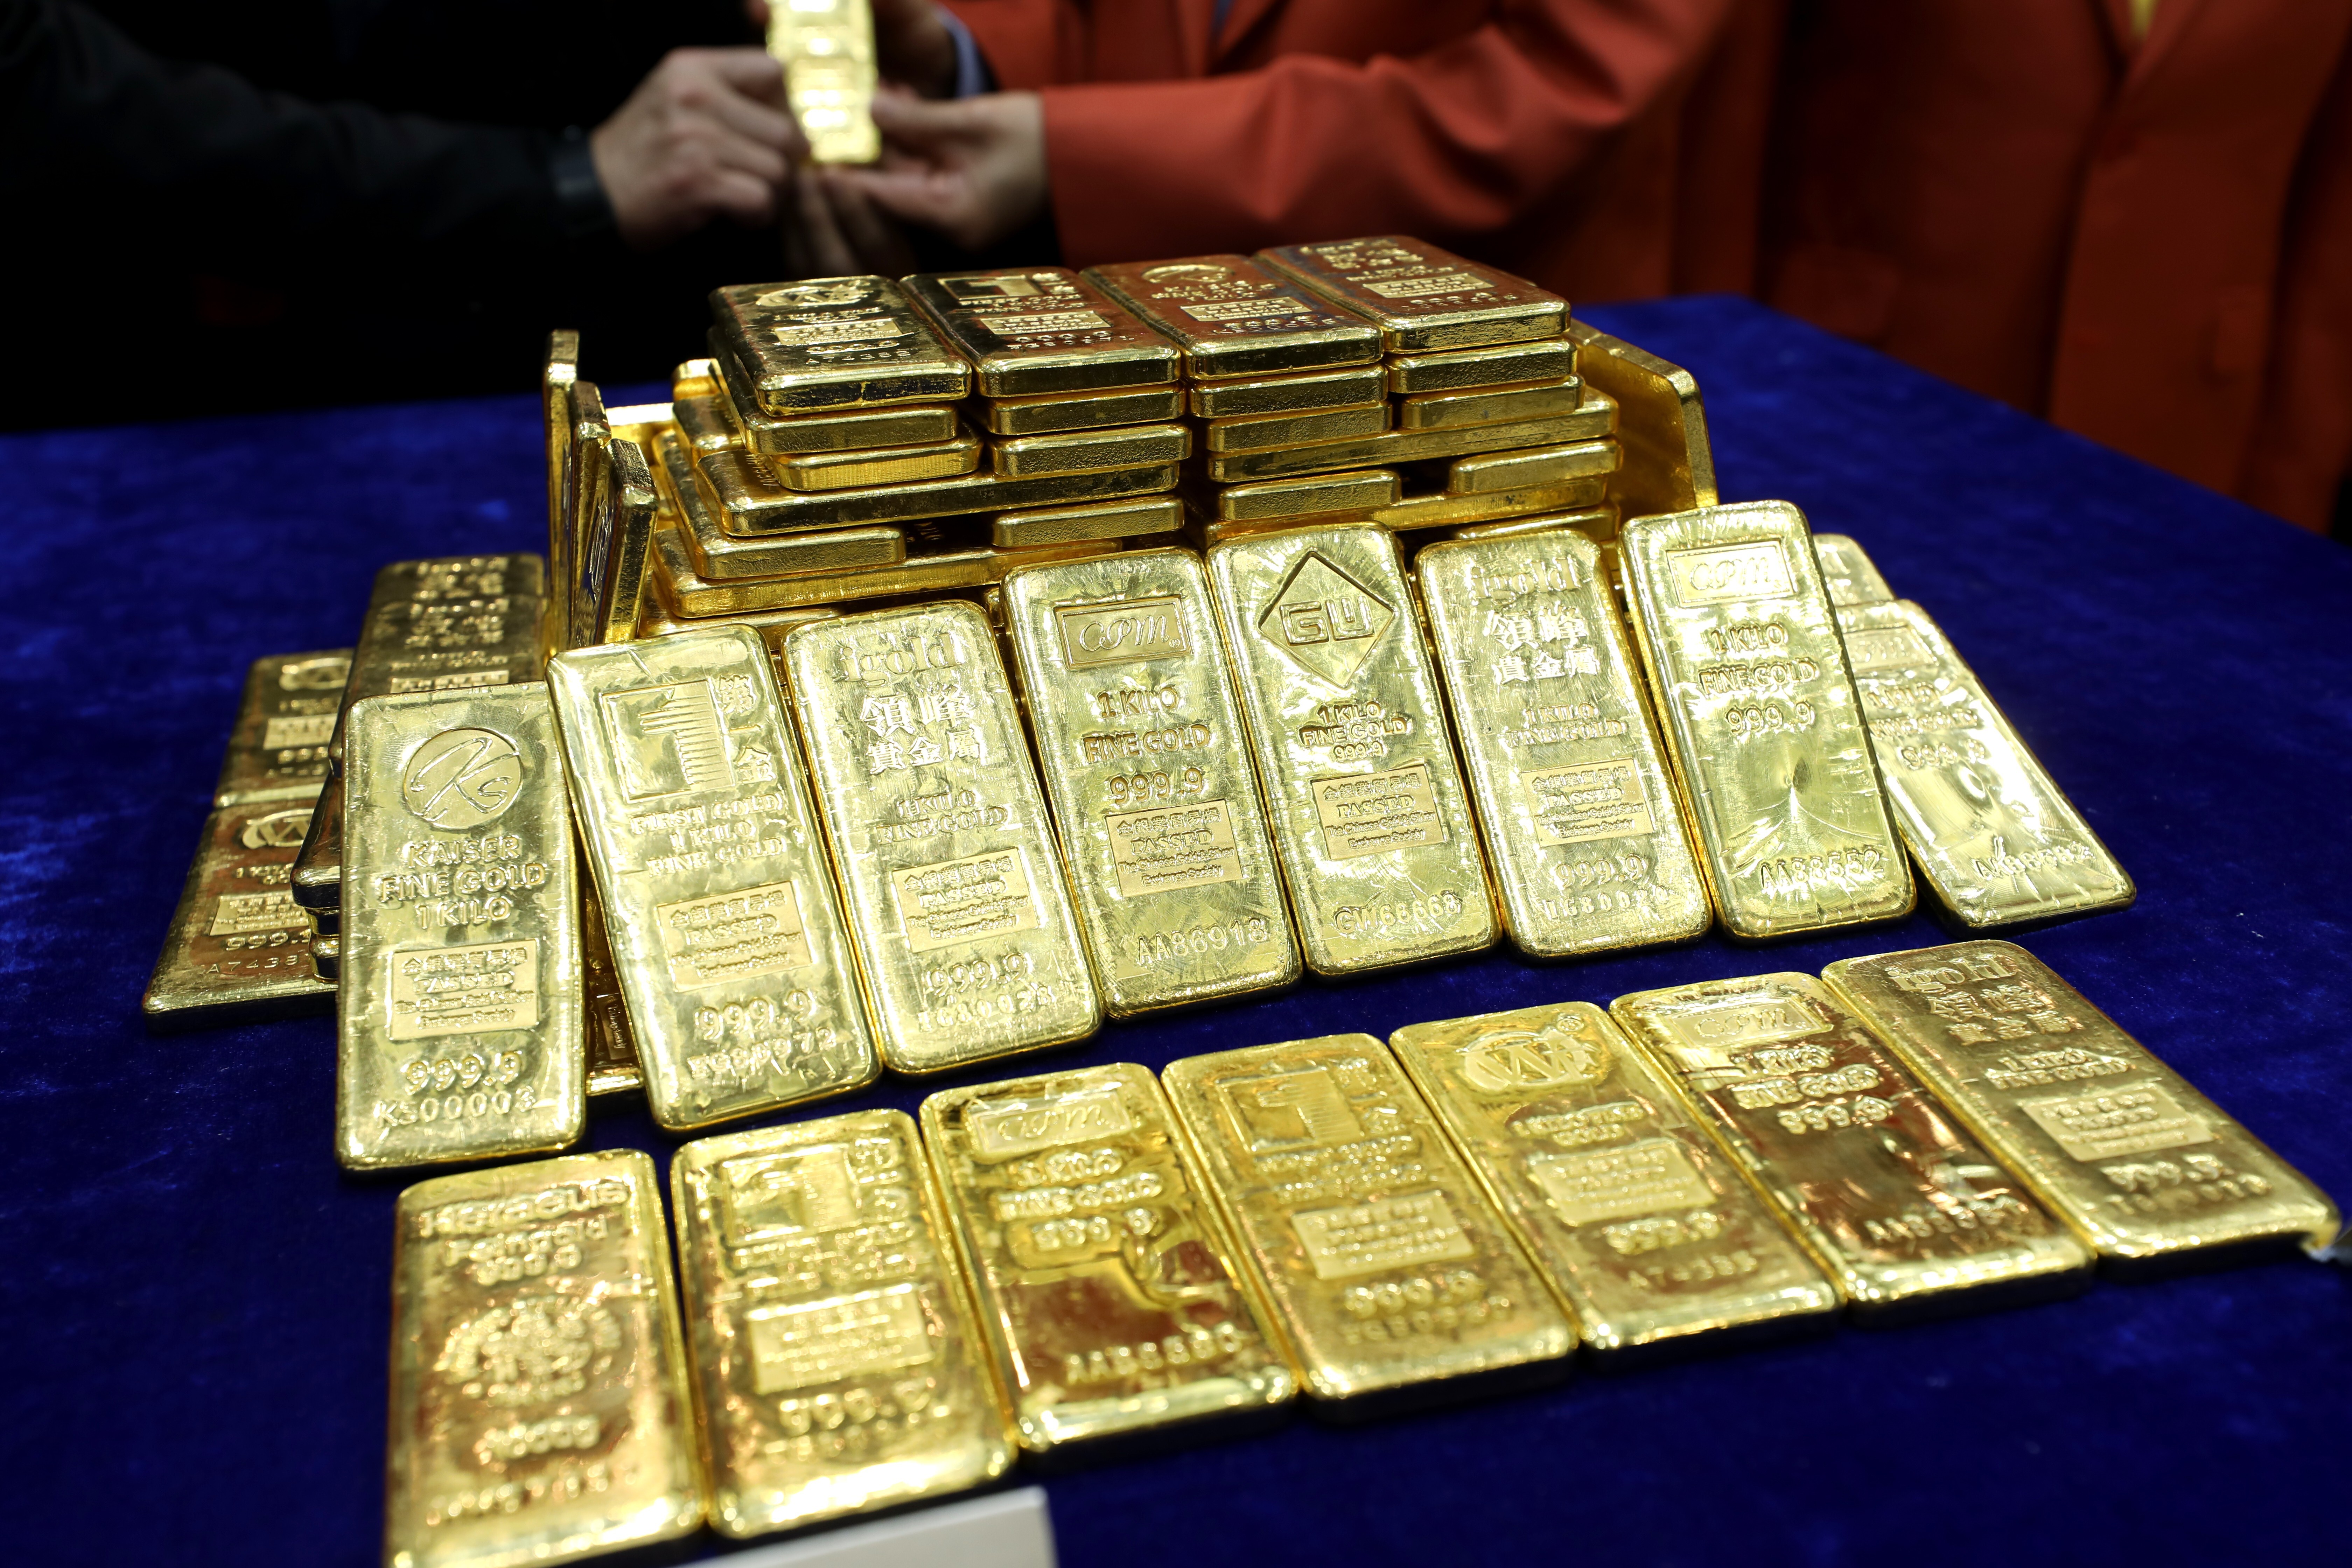 Fake-branded gold bars are slipping into world markets, bankrolling drug  kingpins and warlords